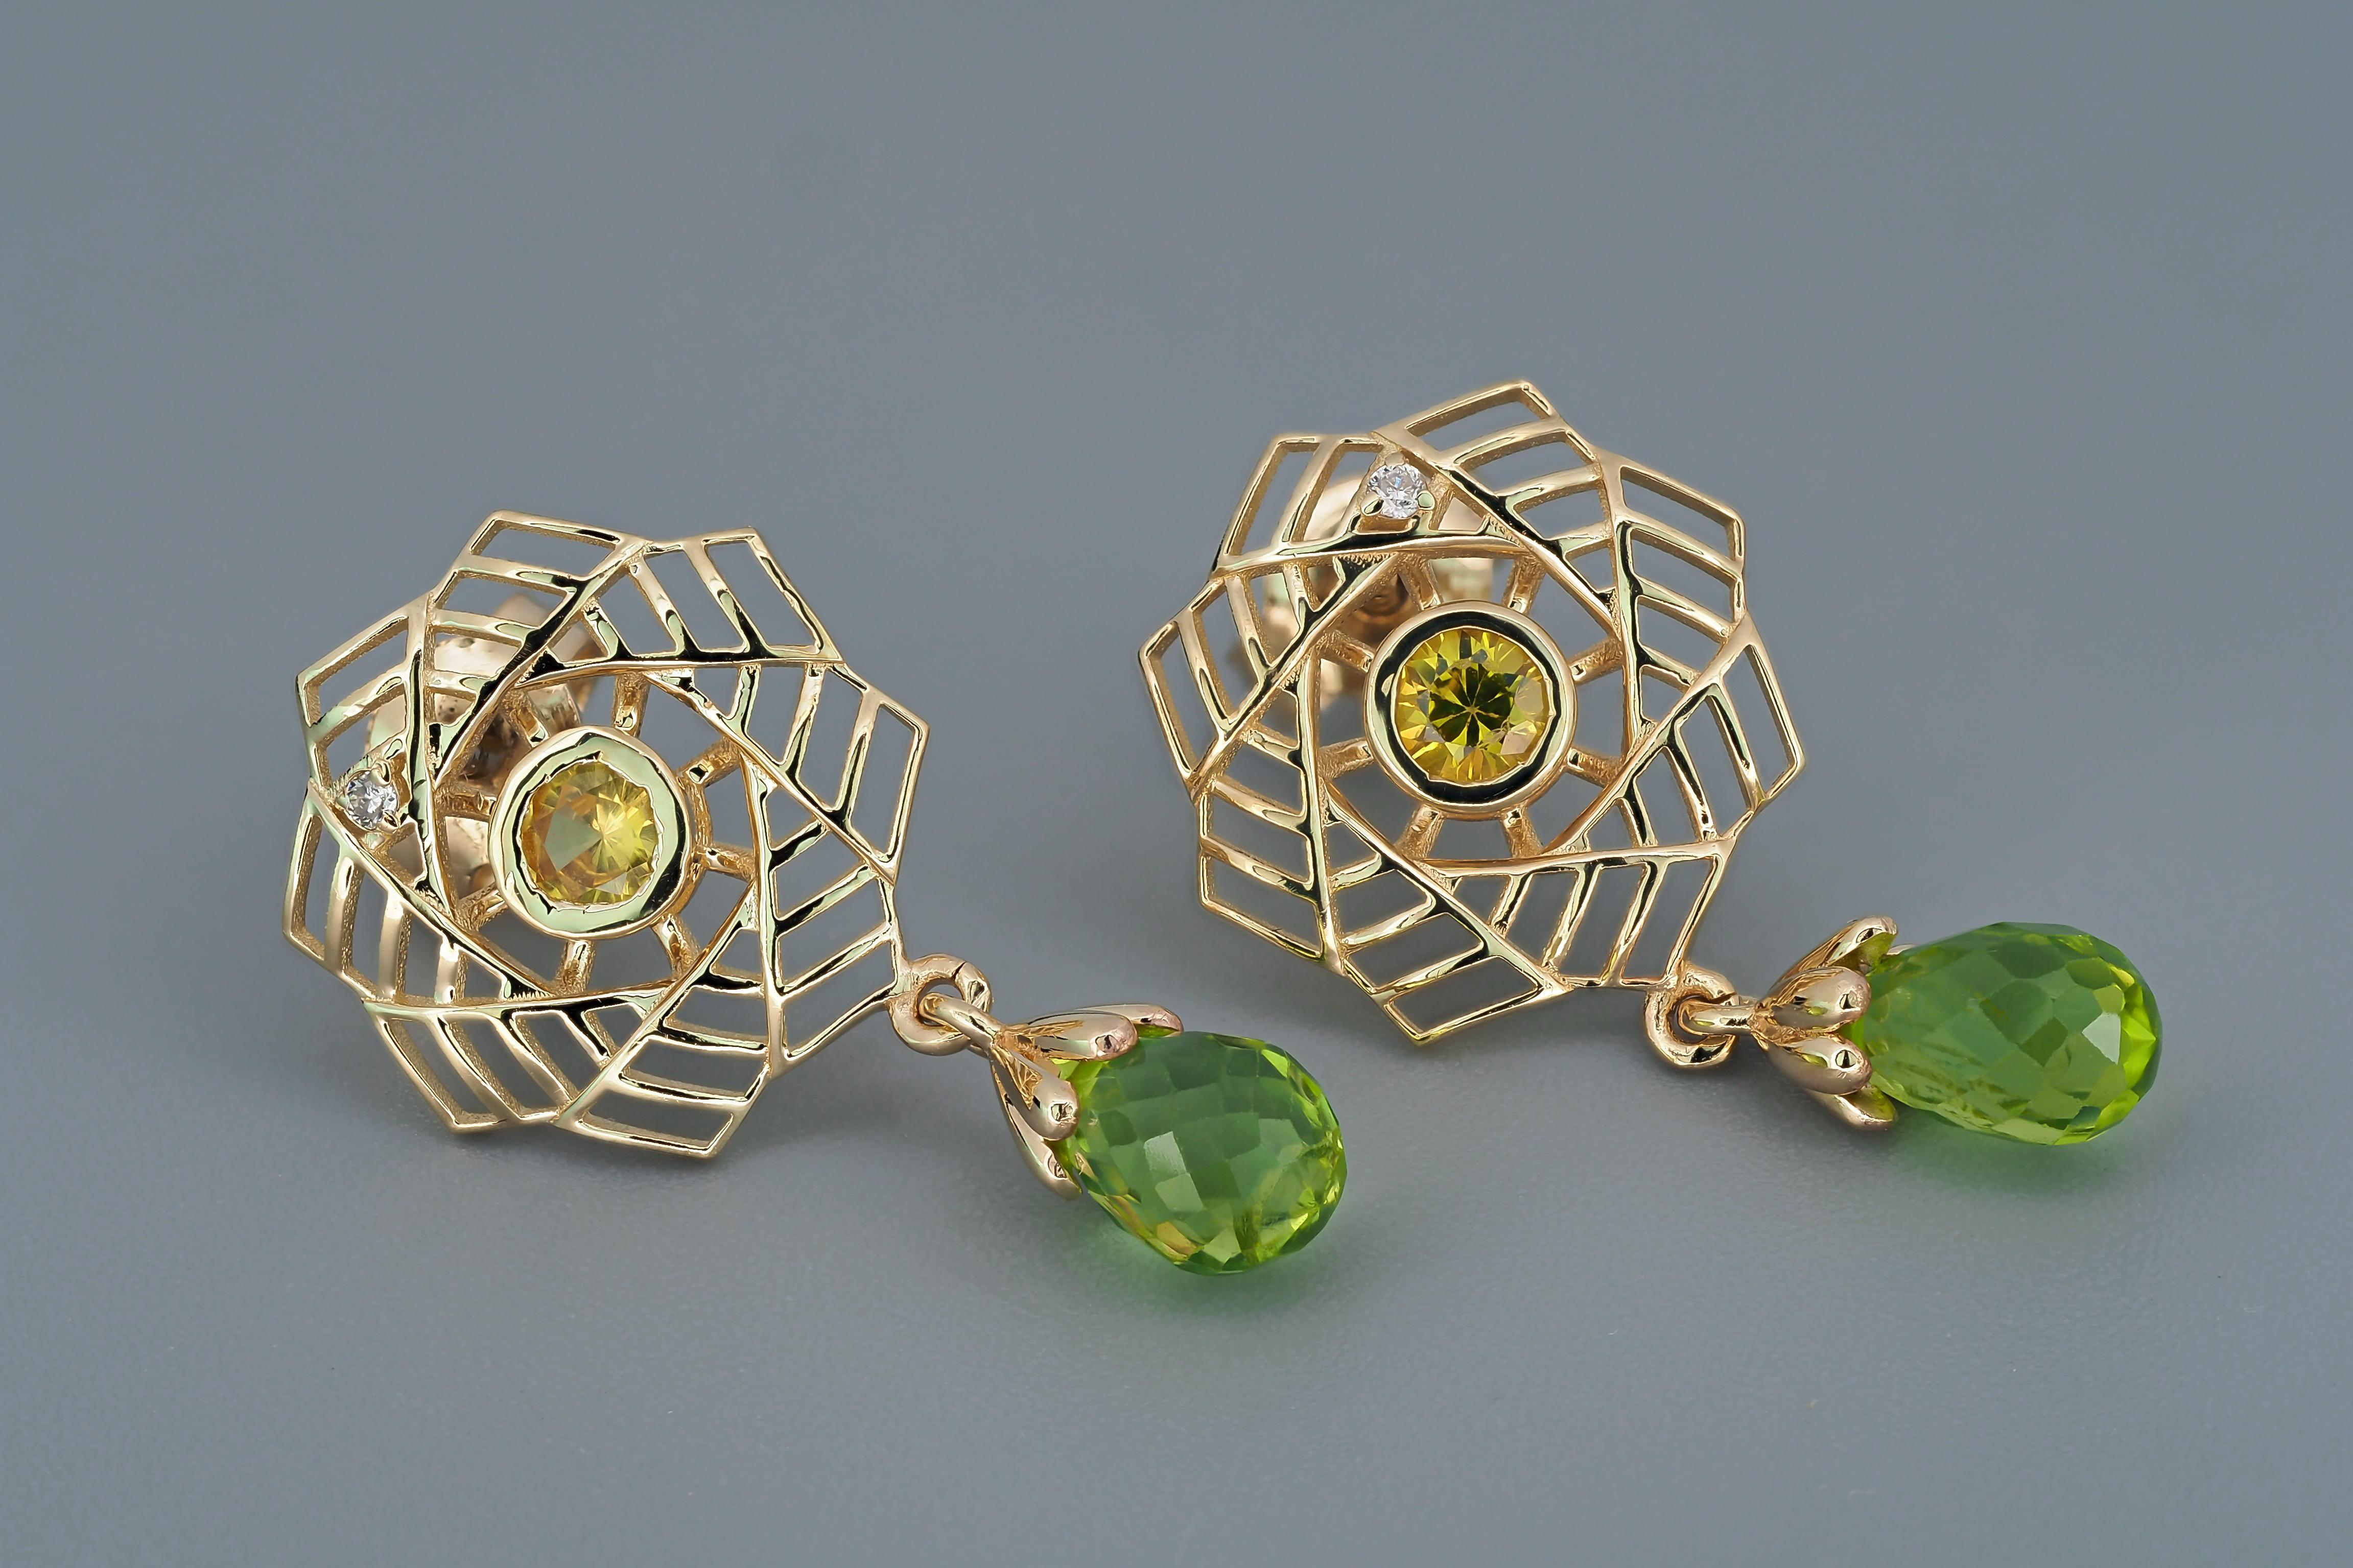 14k gold earrings with peridots, sapphires and diamonds. Peridot earrings in 14k gold. Yellow sapphire earrings in 14k gold. 

Material: 14k gold
Weight: 2.80 g.
Earrings size: 25 x 14 mm
Peridots:
2 pieces, green - color, briolette cut,